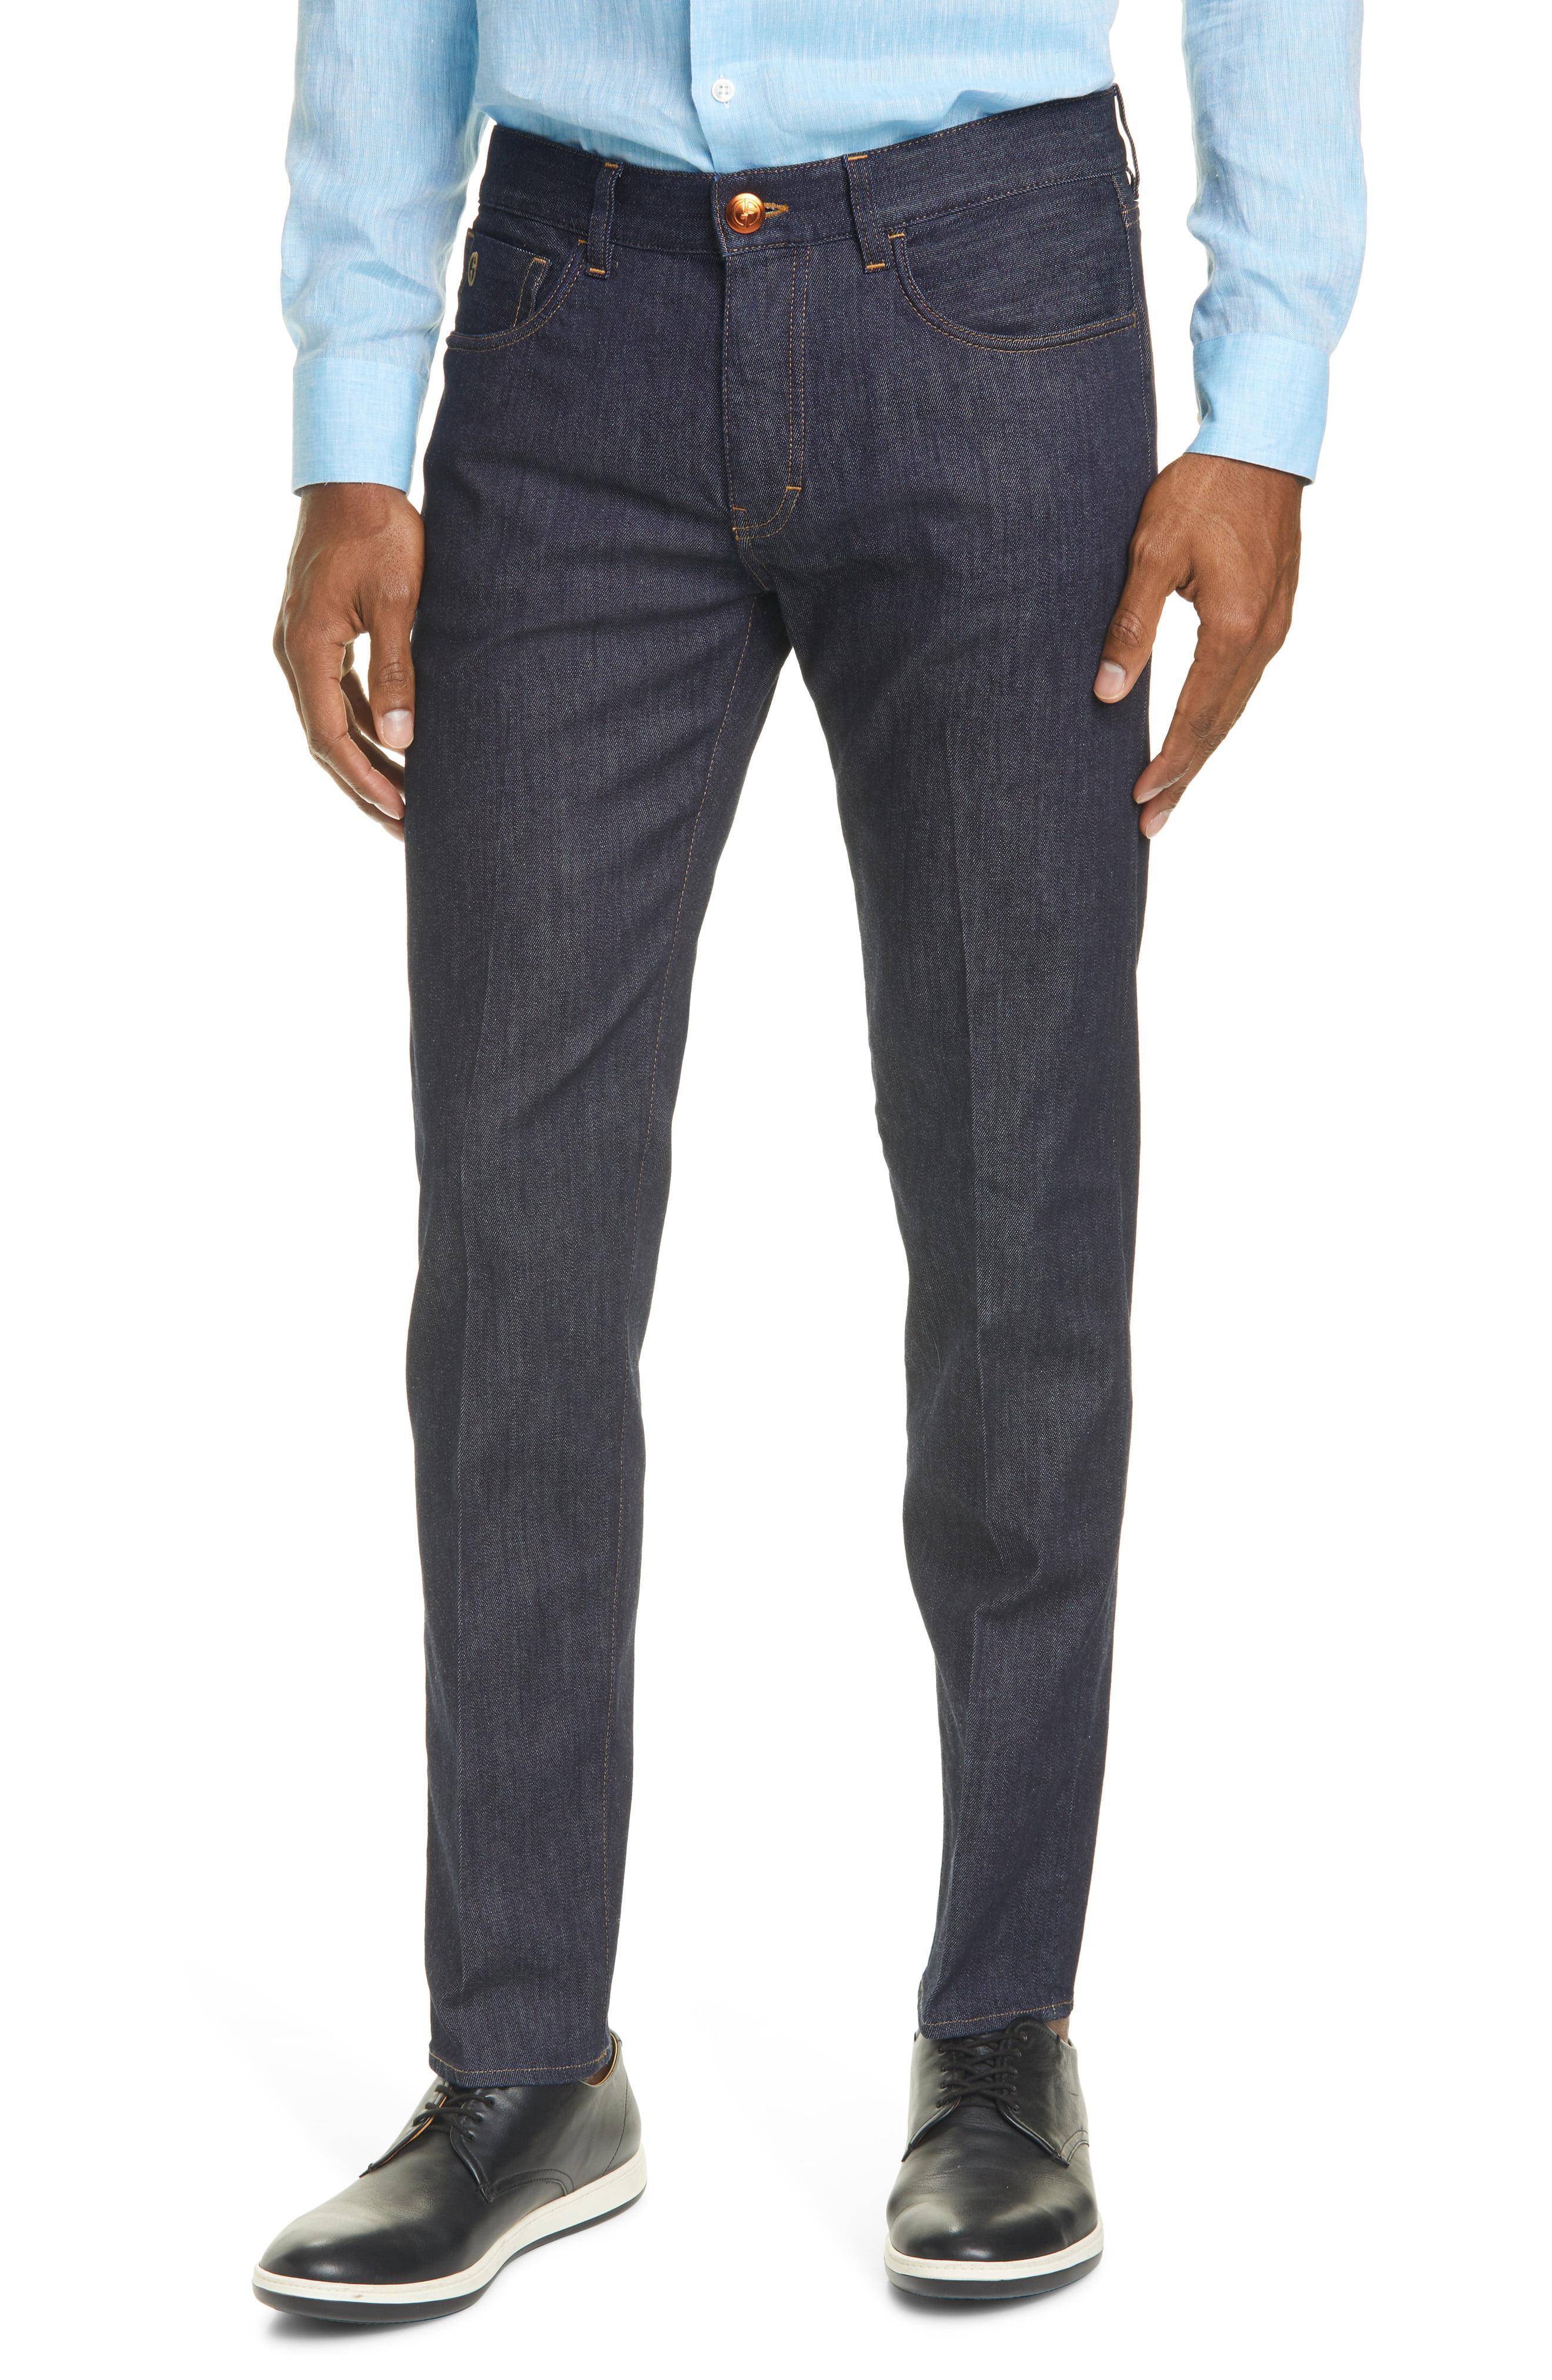 Giorgio Armani Denim Slim Fit Tapered Jeans in Navy (Blue) for Men - Lyst